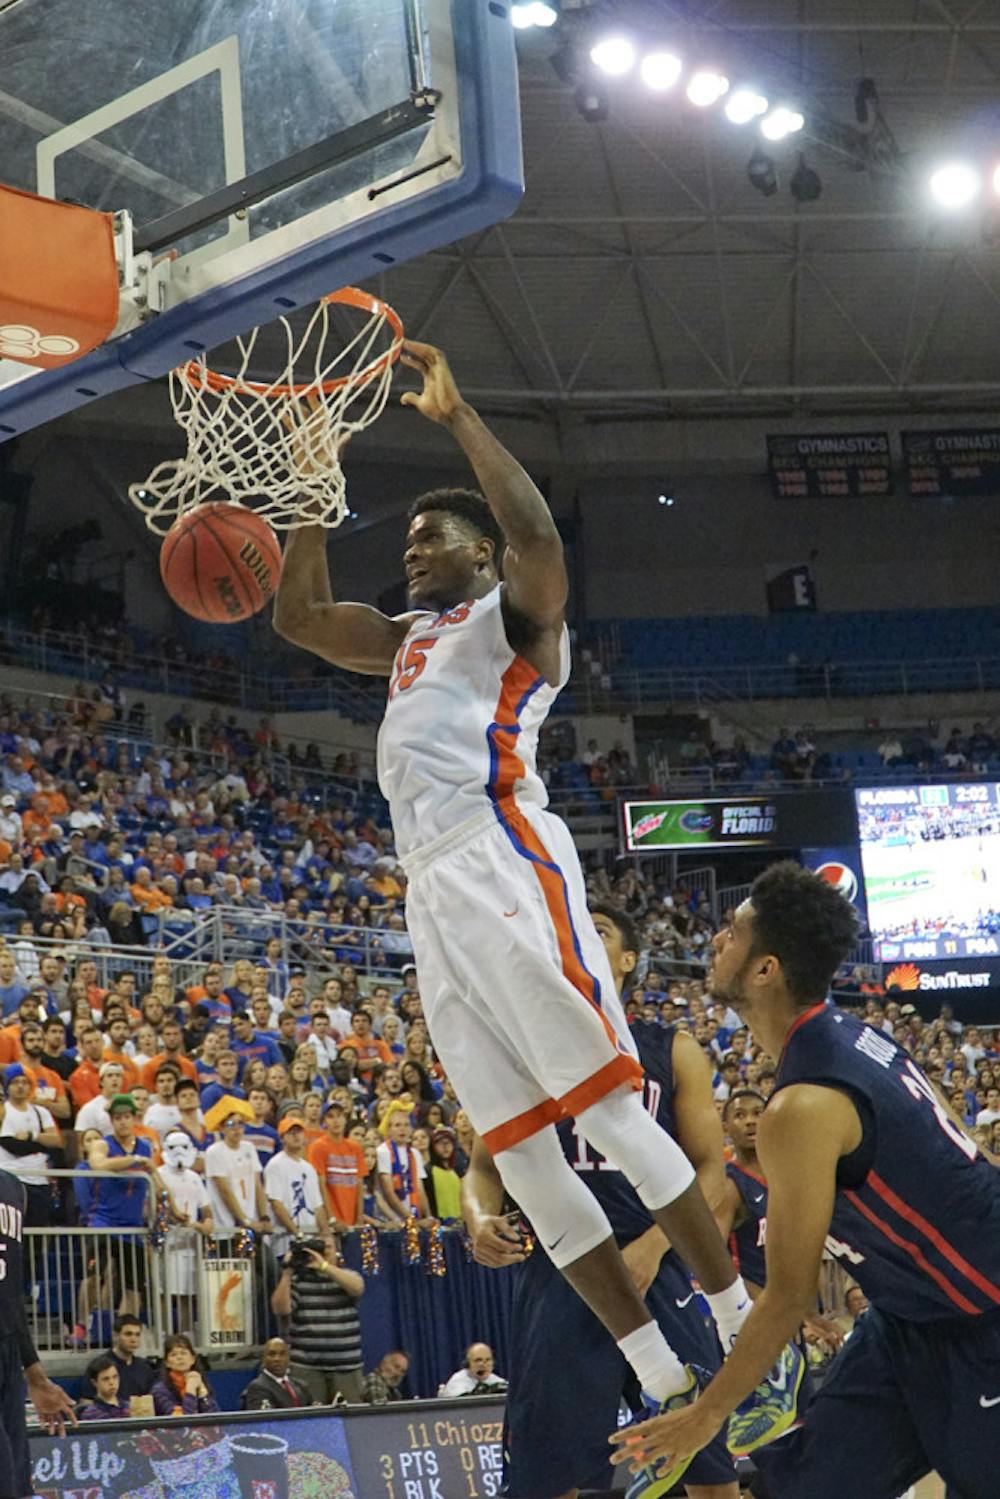 <p>UF's John Egbunu dunks during Florida's 76-56 win against Richmond on Dec. 1, 2015, in the O'Connell Center.</p>